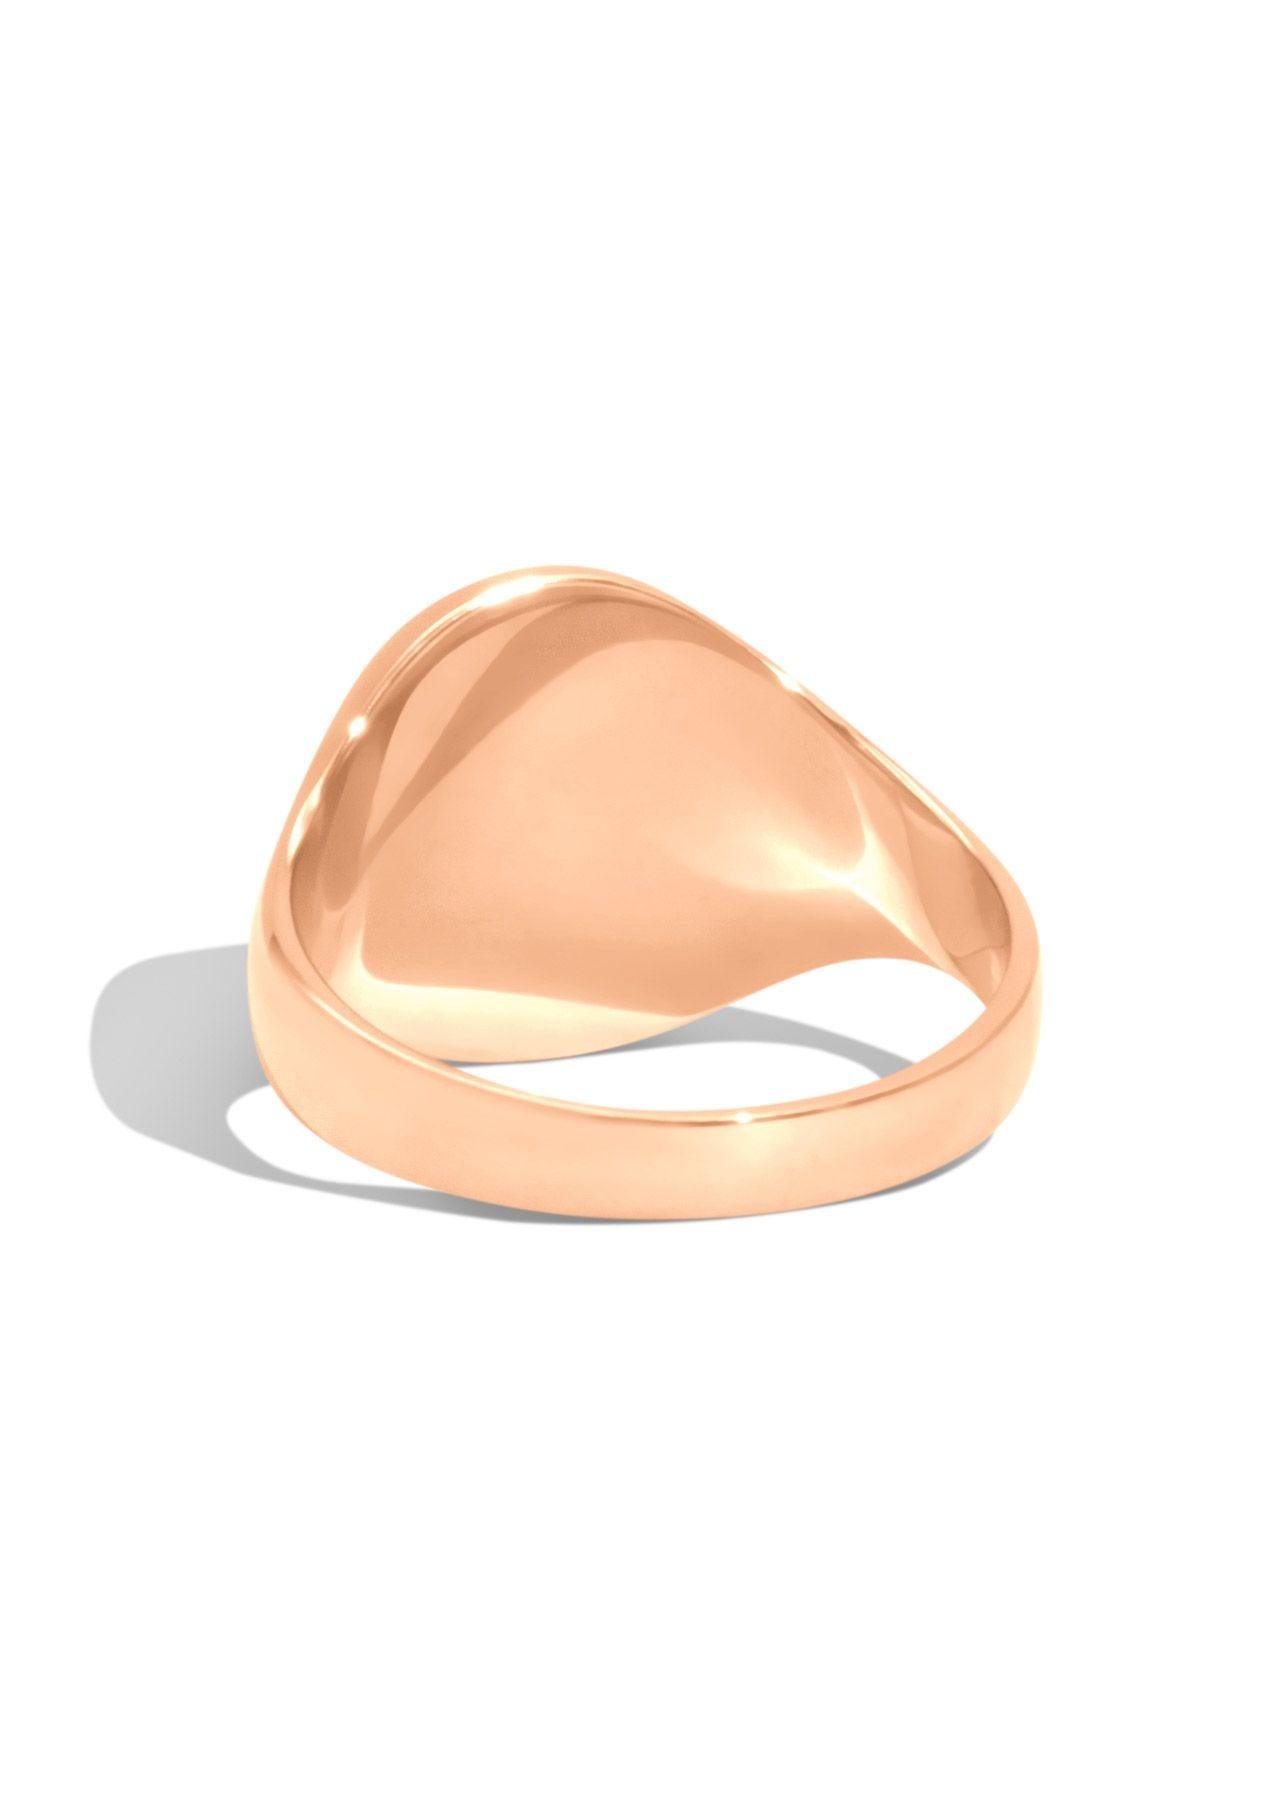 The Eclipse Rose Gold Signet Ring